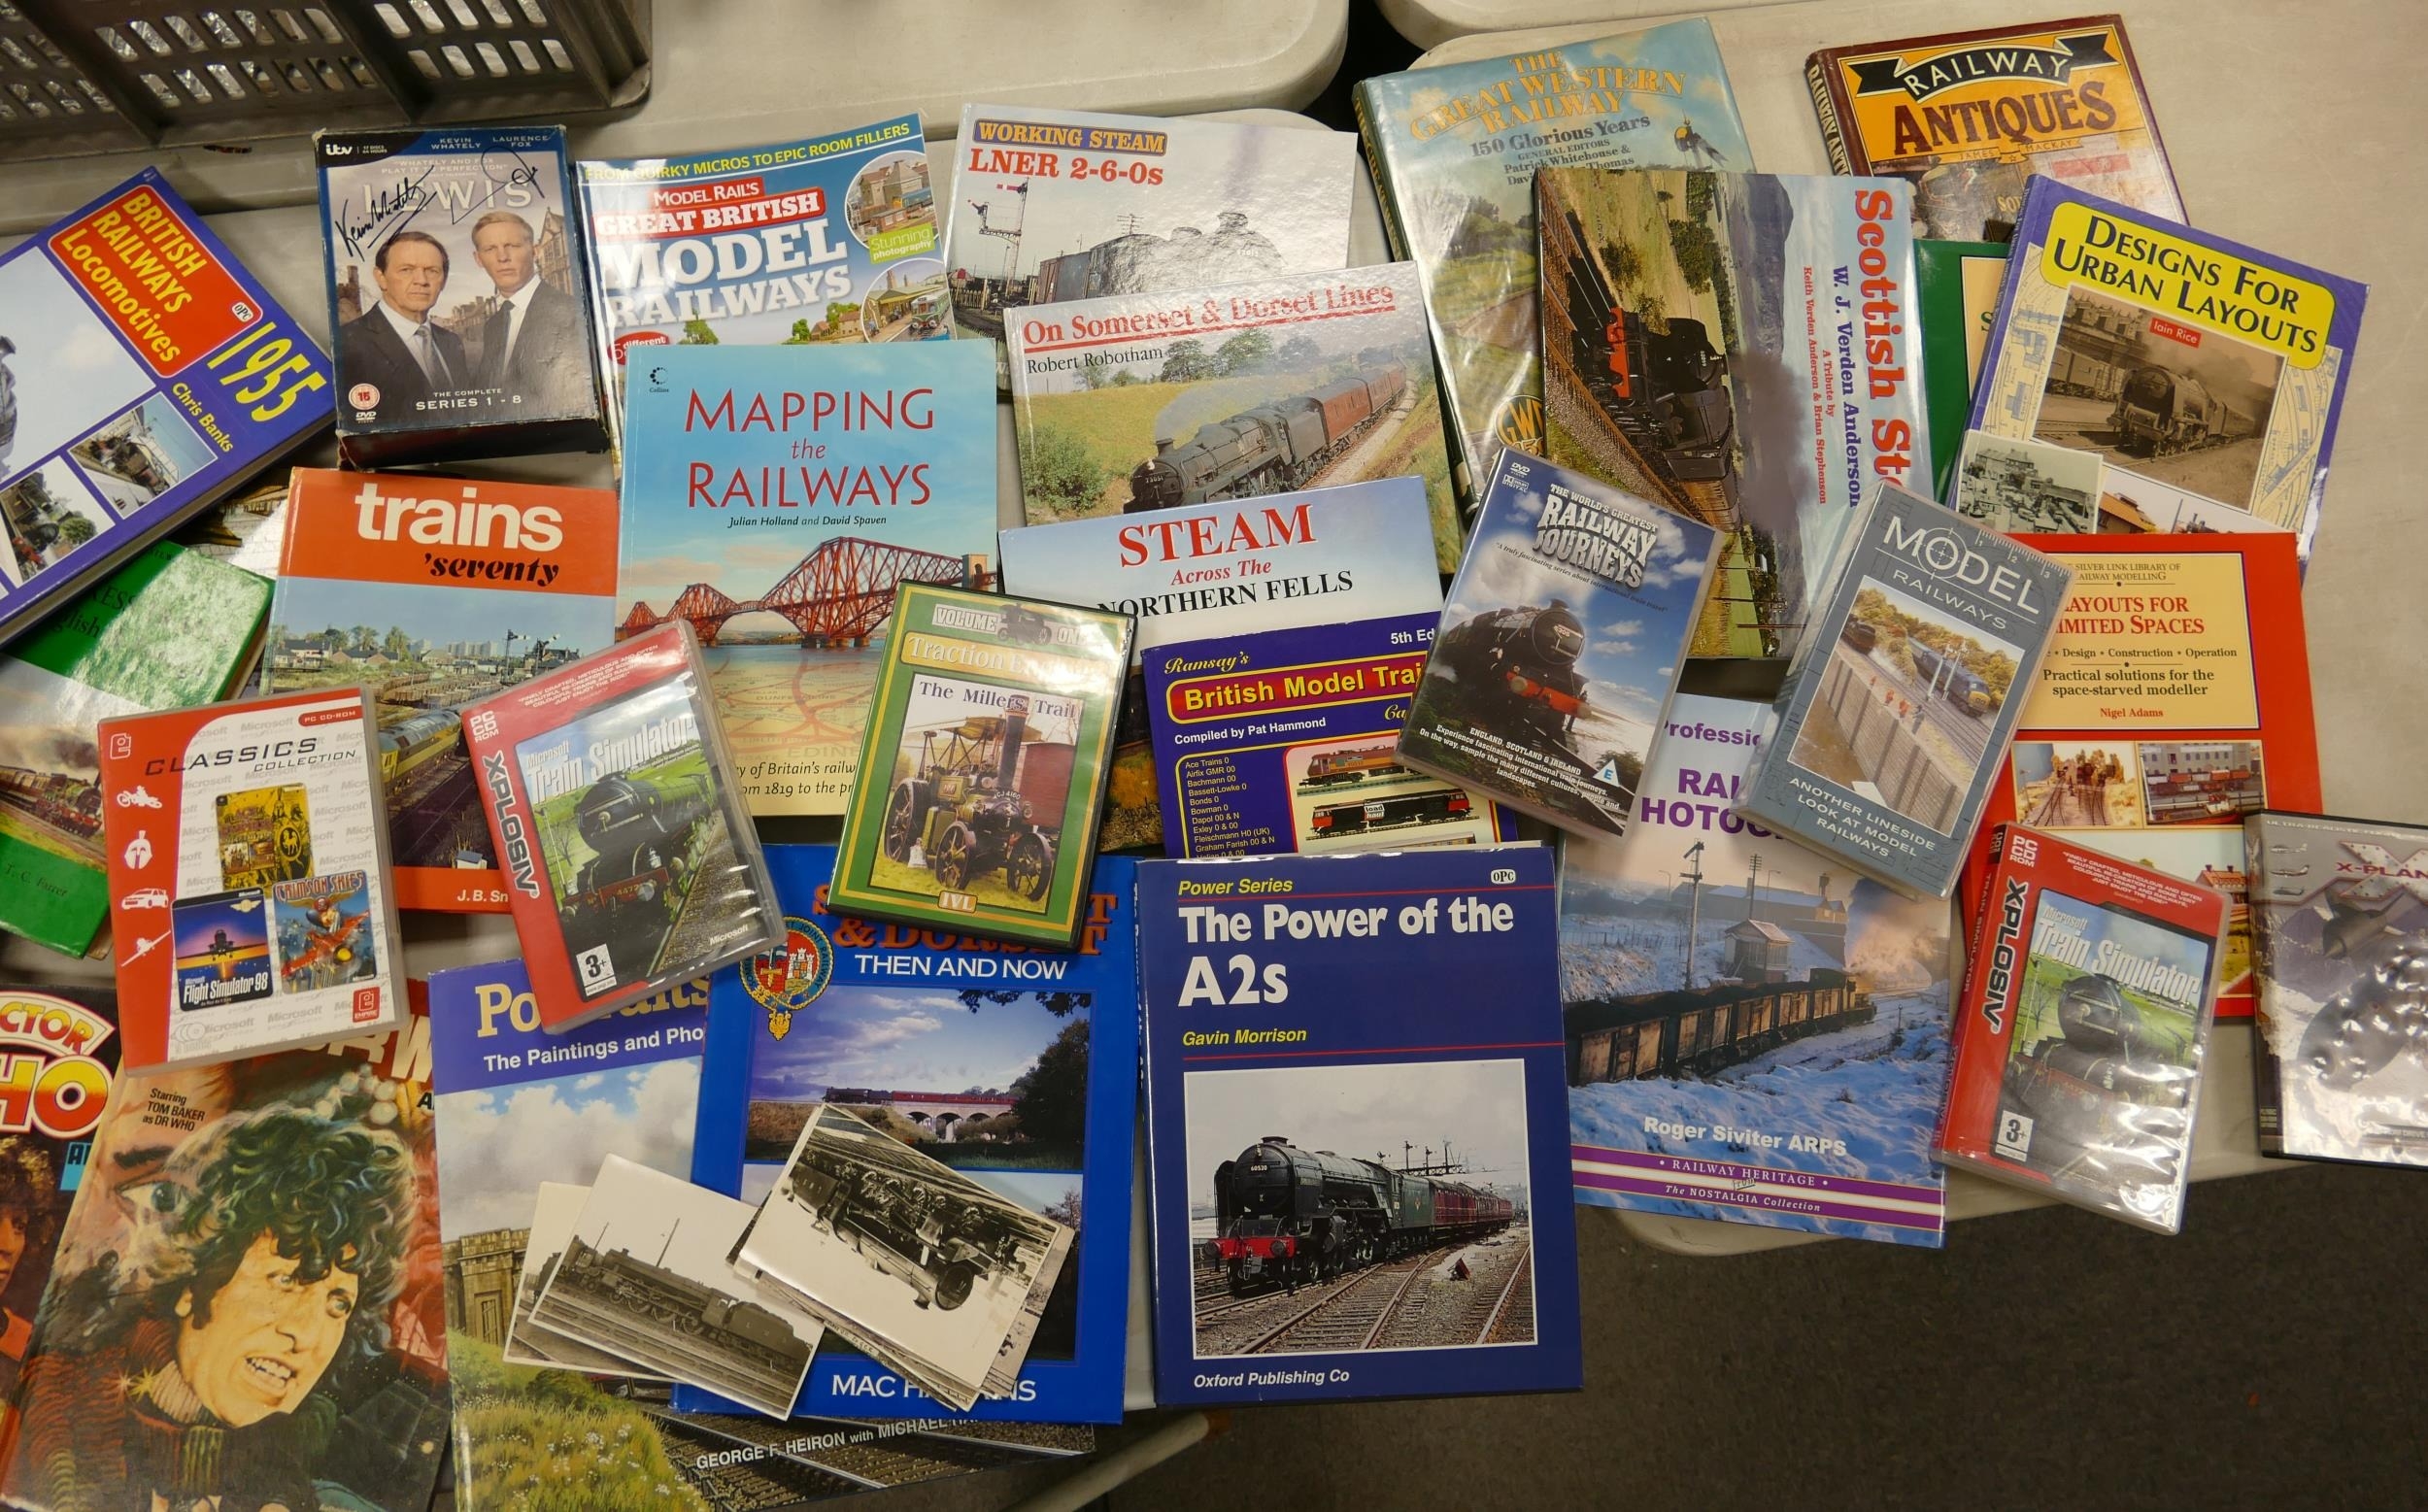 A collection of books, Annuals, DVD's, CD's and Stamps to include Railway Antiques, Designs For - Image 2 of 3